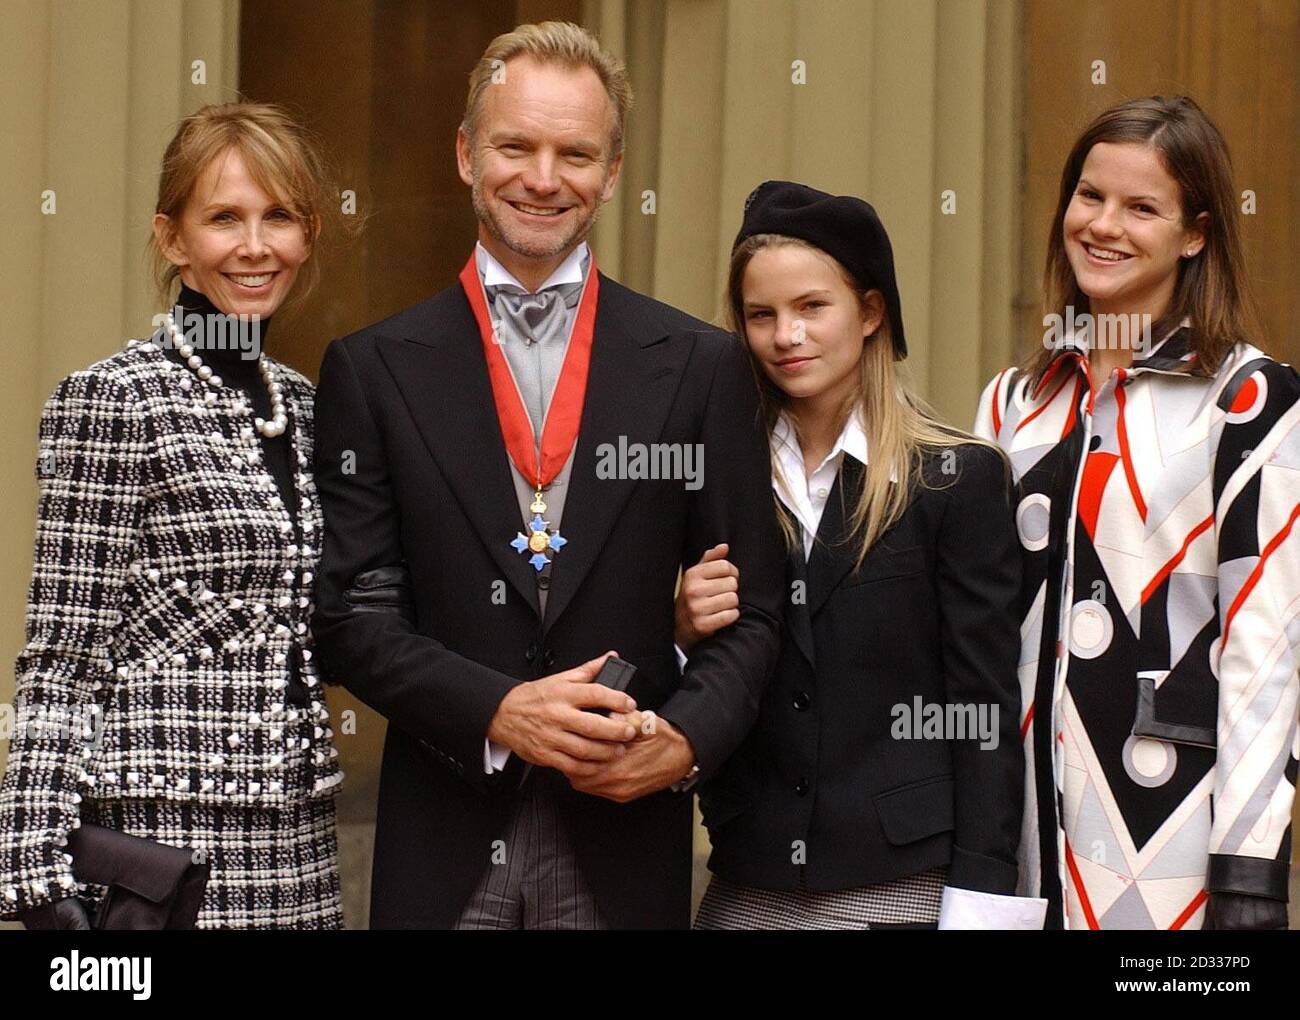 Gordon Sumner 'Sting' with his wife Trudie Styler, and daughters Coco, 13, and Kate, 21,  holding his CBE at Buckingham Palace, which he received for services to the music industry. 'I'm surprised and flattered to receive this honour,' he said recently. 'If my mum and dad were still here they would be made up.' A father of six and a devoted Yoga practitioner, the 51-year-old star was born in Wallsend, on Tyneside, the son of a milkman. Stock Photo